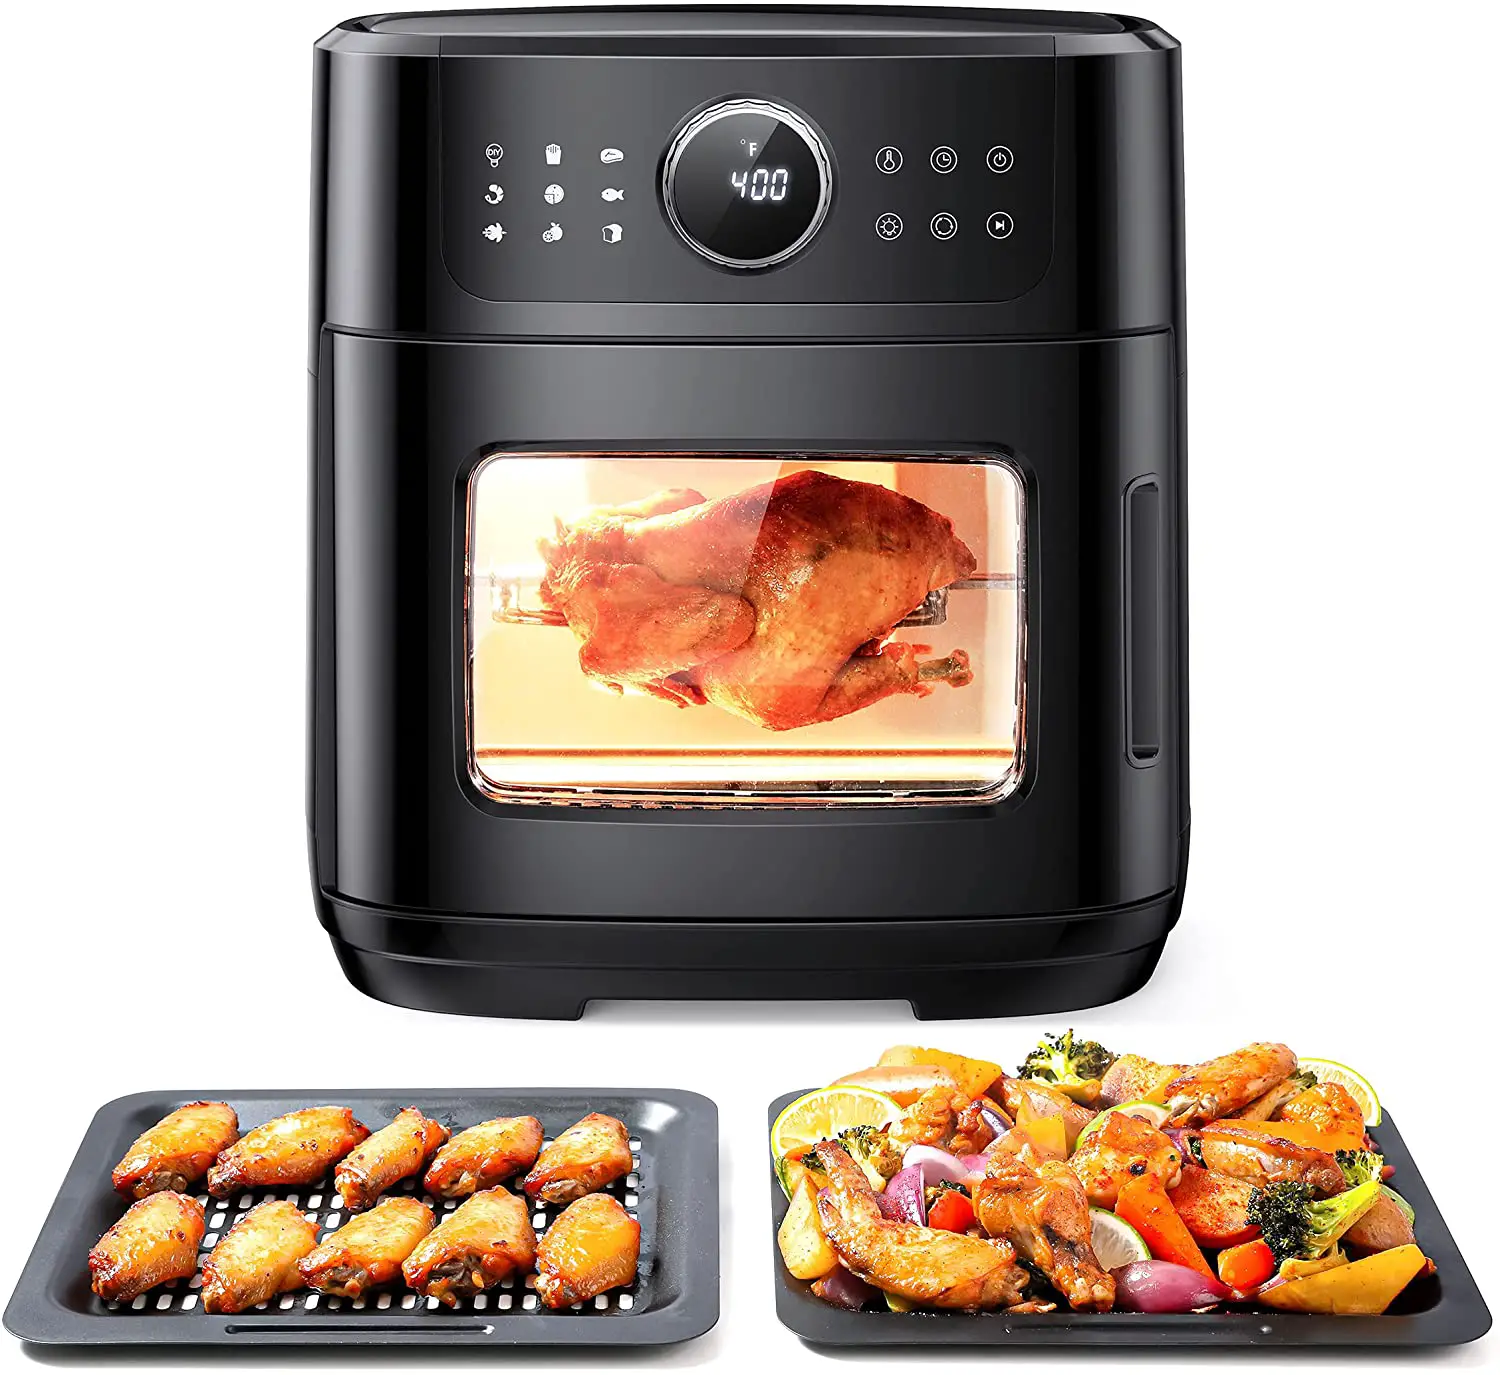 13 QT Air Fryer Toaster Oven $69.99 at Amazon (reg. $129.99  SAVE 46%)